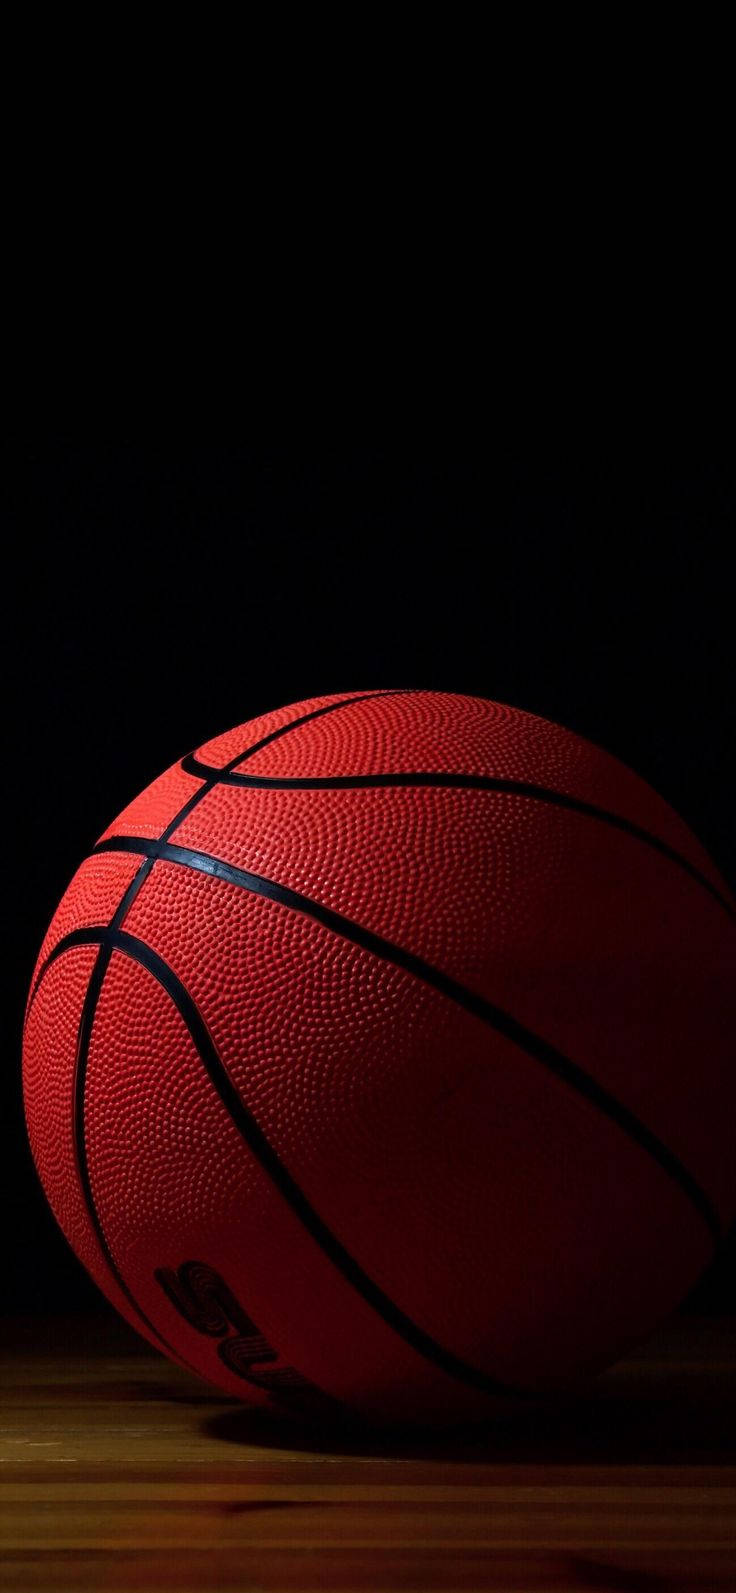 Ball Photography Cool Basketball Iphone Background